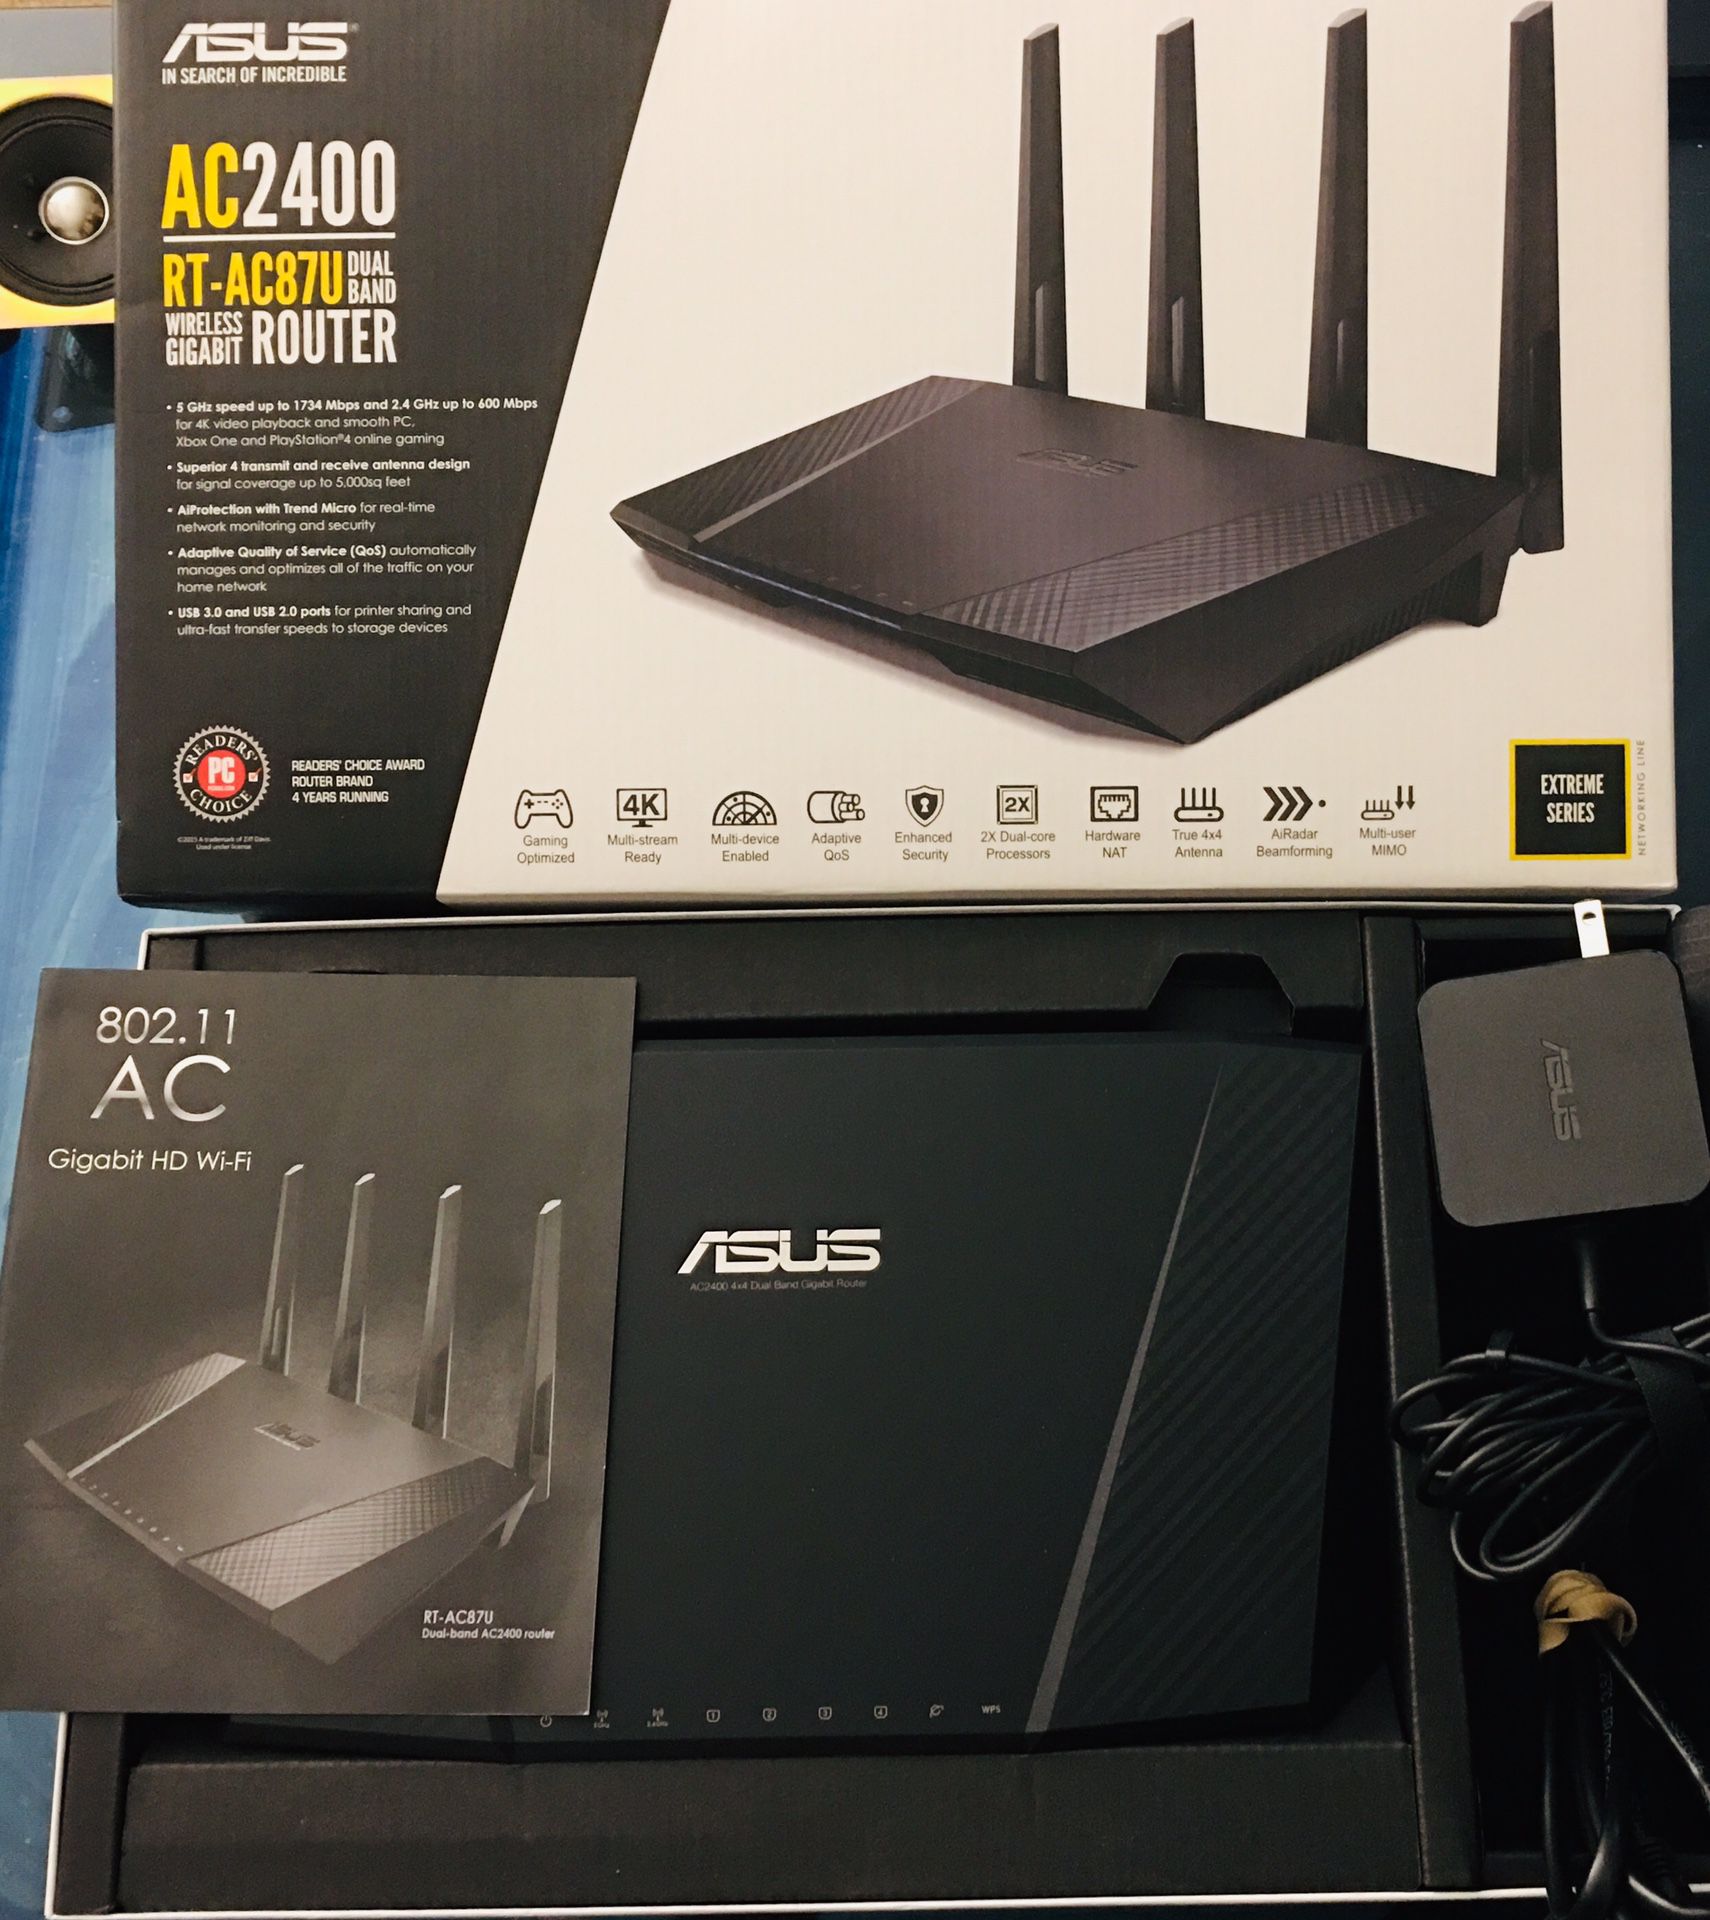 ASUS AC2400 RT- AC87U Wireless Router